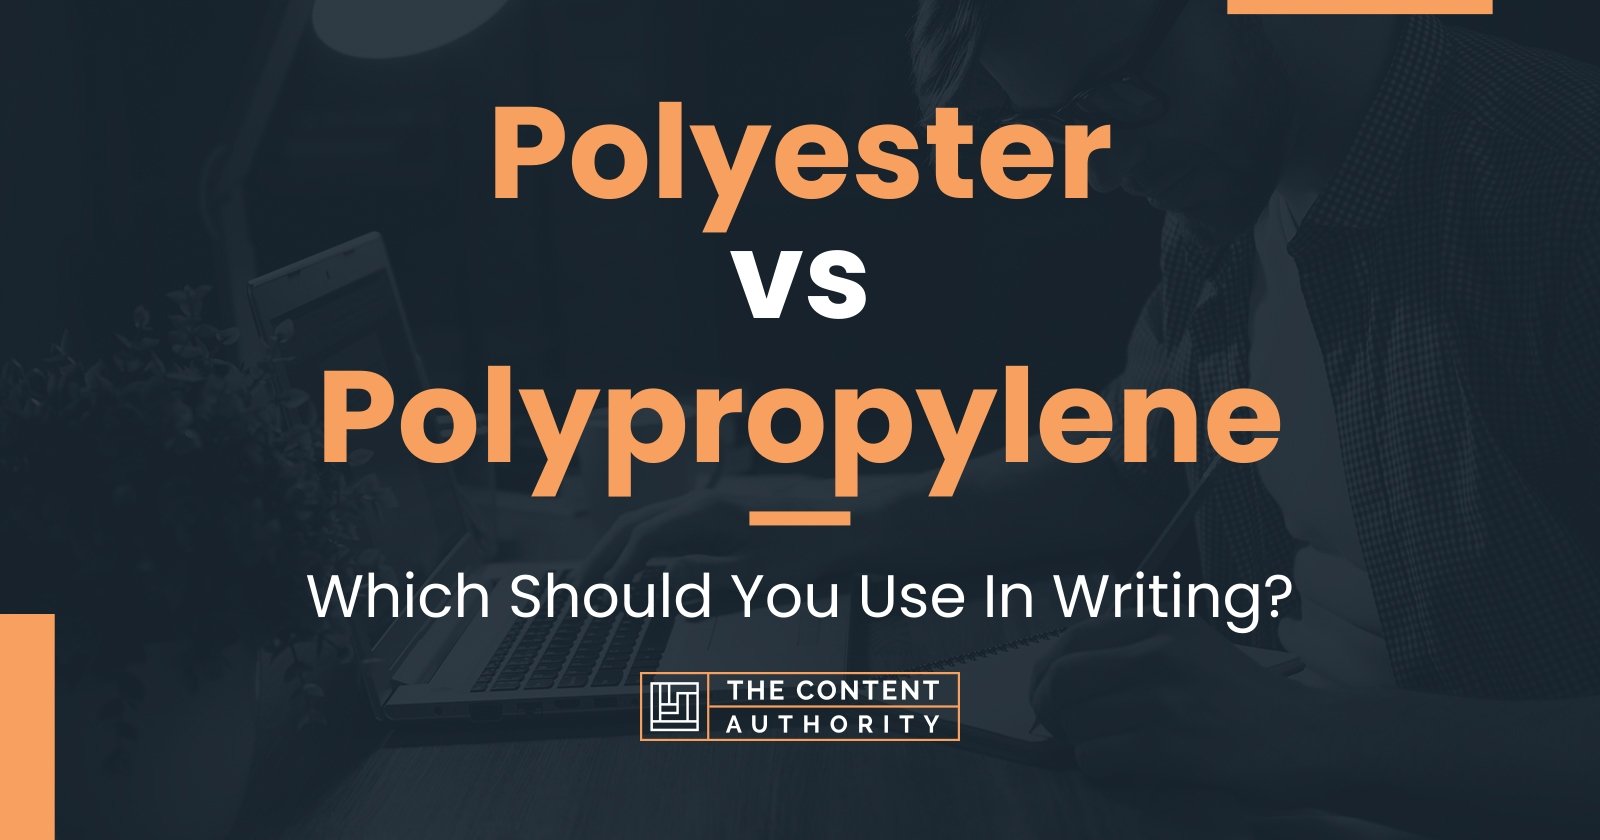 Polyester vs Polypropylene: Which Should You Use In Writing?